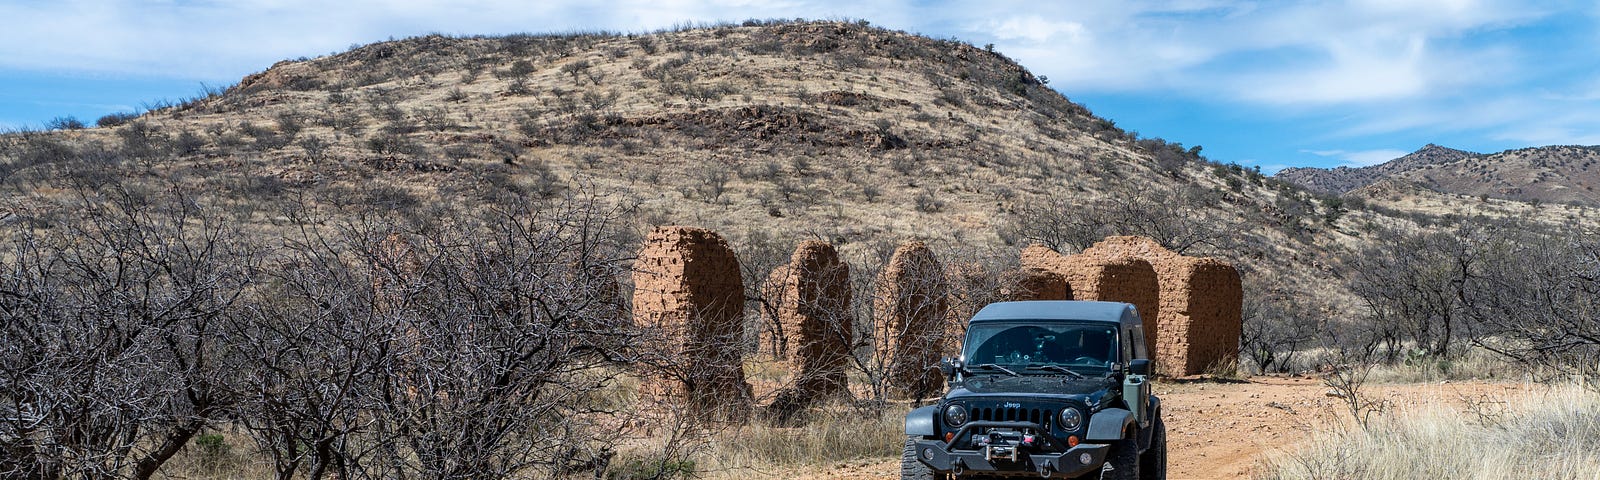 Black Jeep parked in front of adobe ruins in the southern Arizona backcountry